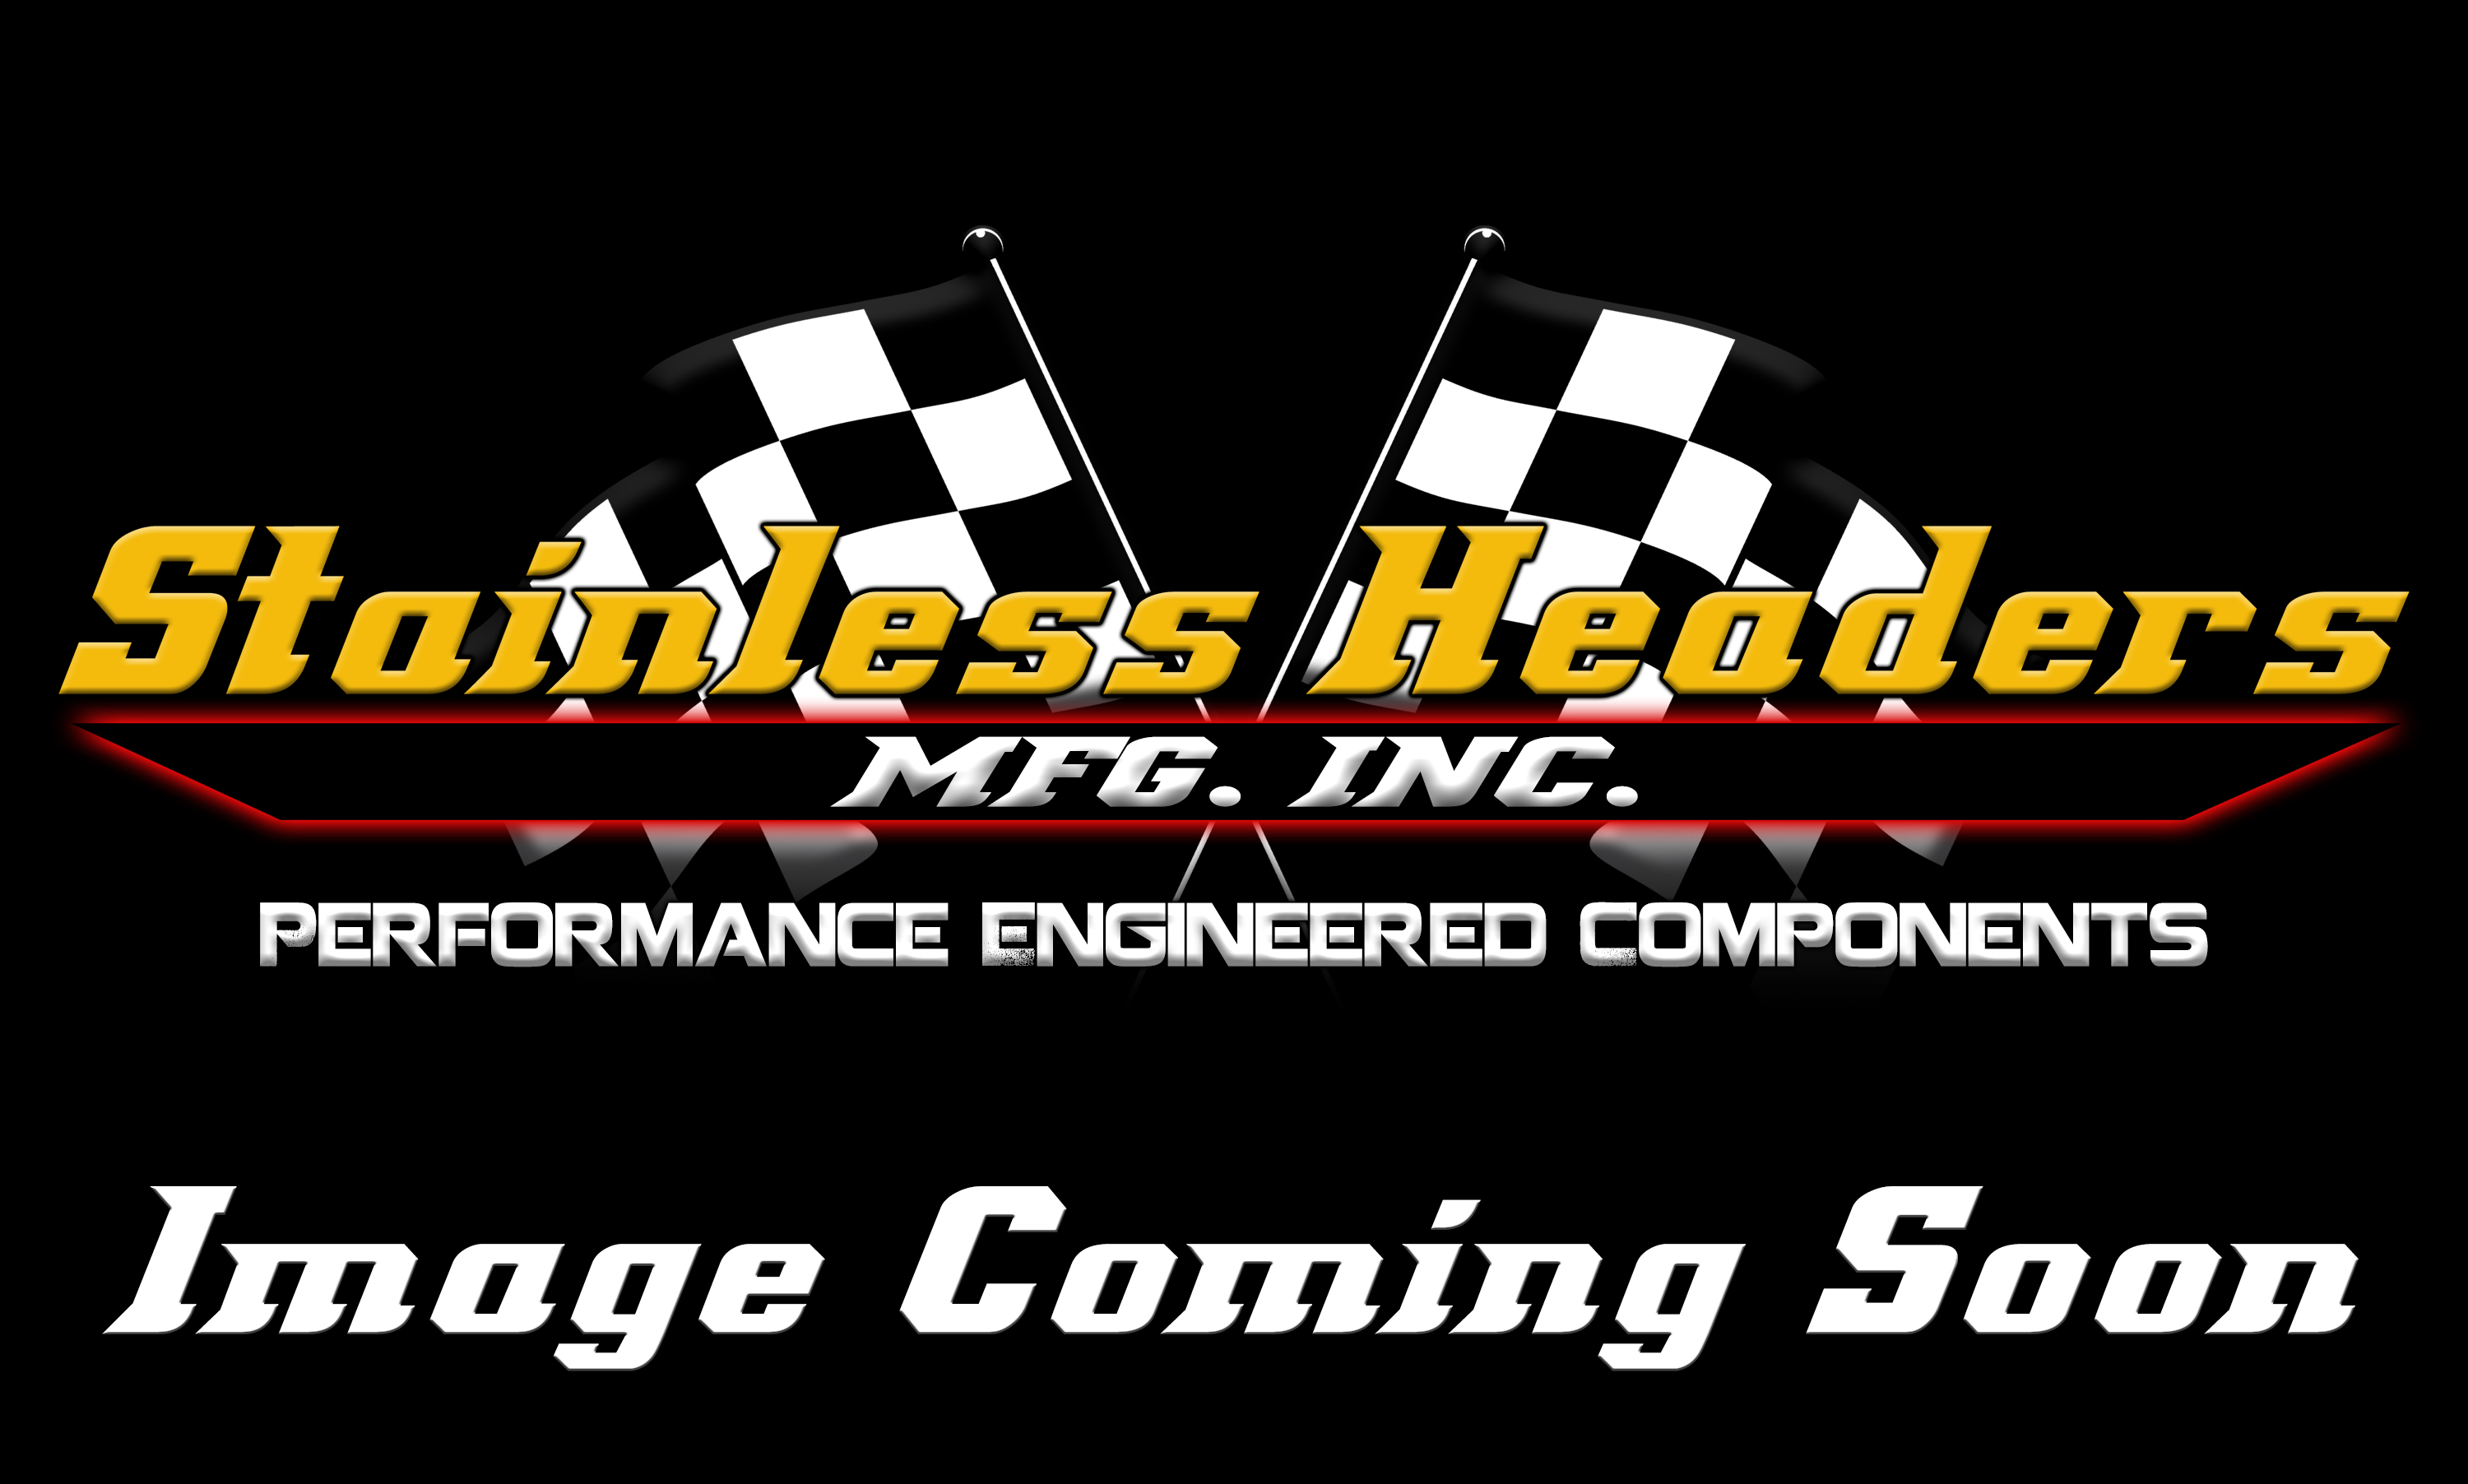 Stainless Headers - 2" Primary 4 into 1 Performance Merge Collector-18ga 321ss - Image 3